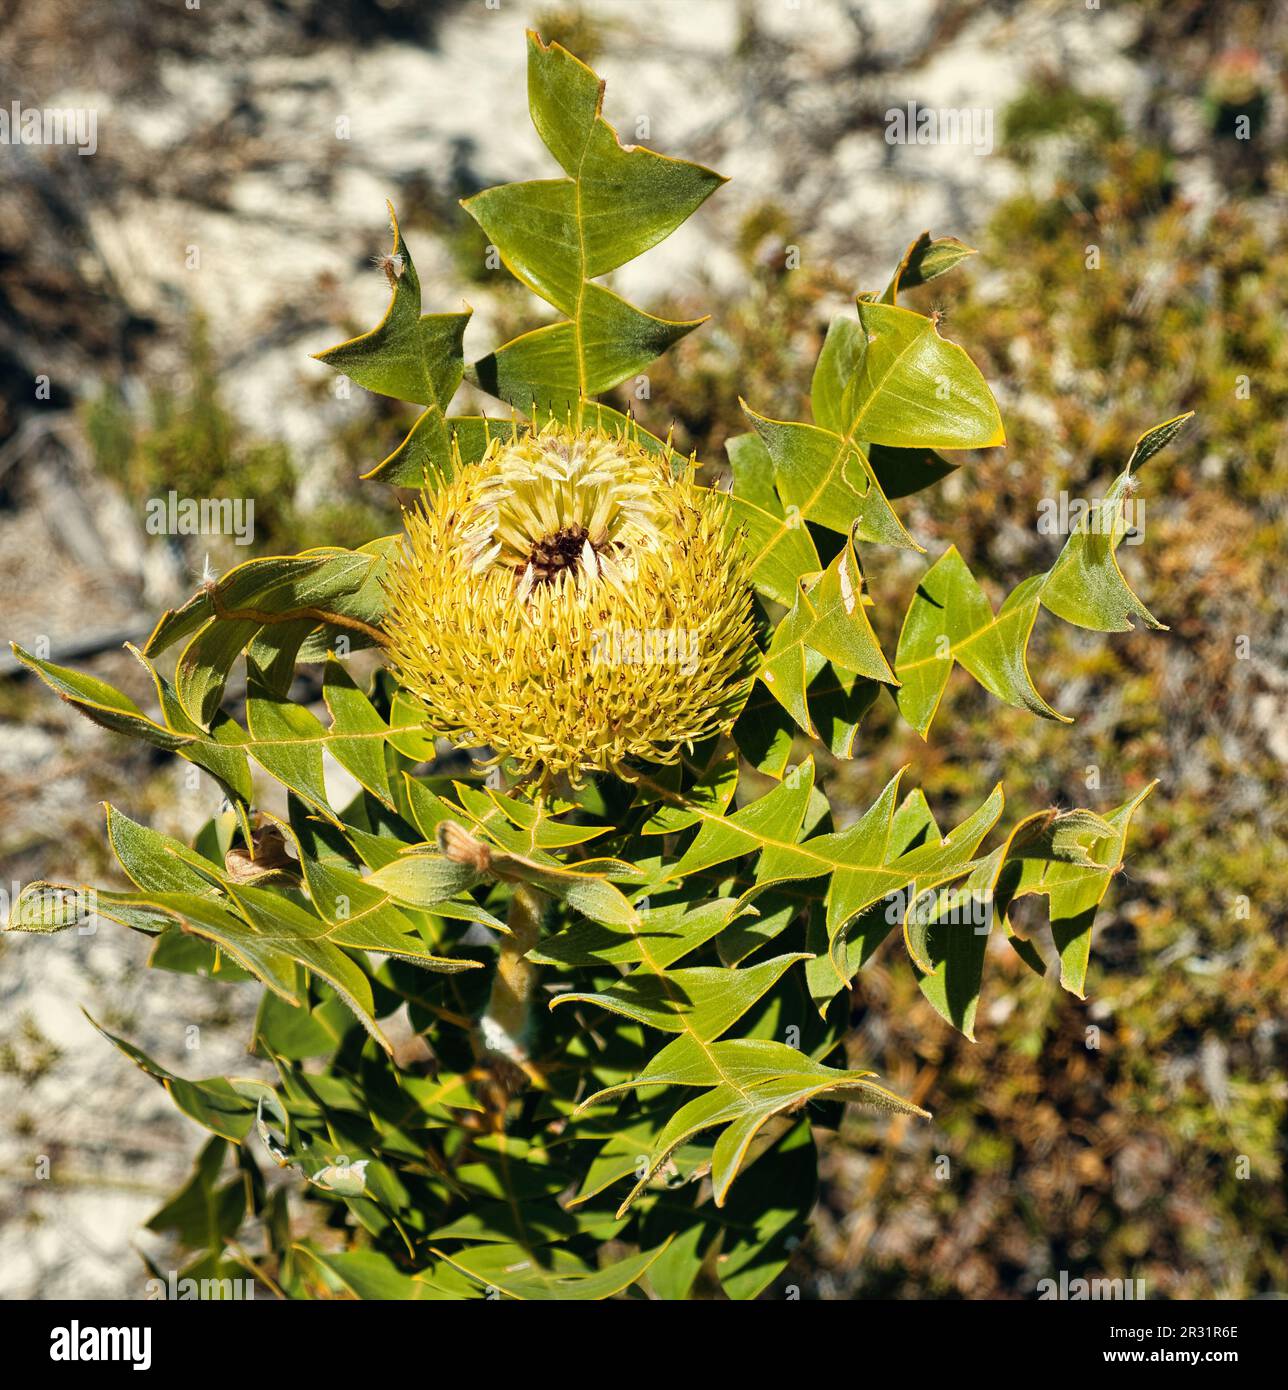 Flowers and the characteristic leaves of banksia grandis (giant banksia) Fitzgerald River National Park, south coast of Western Australia. Stock Photo